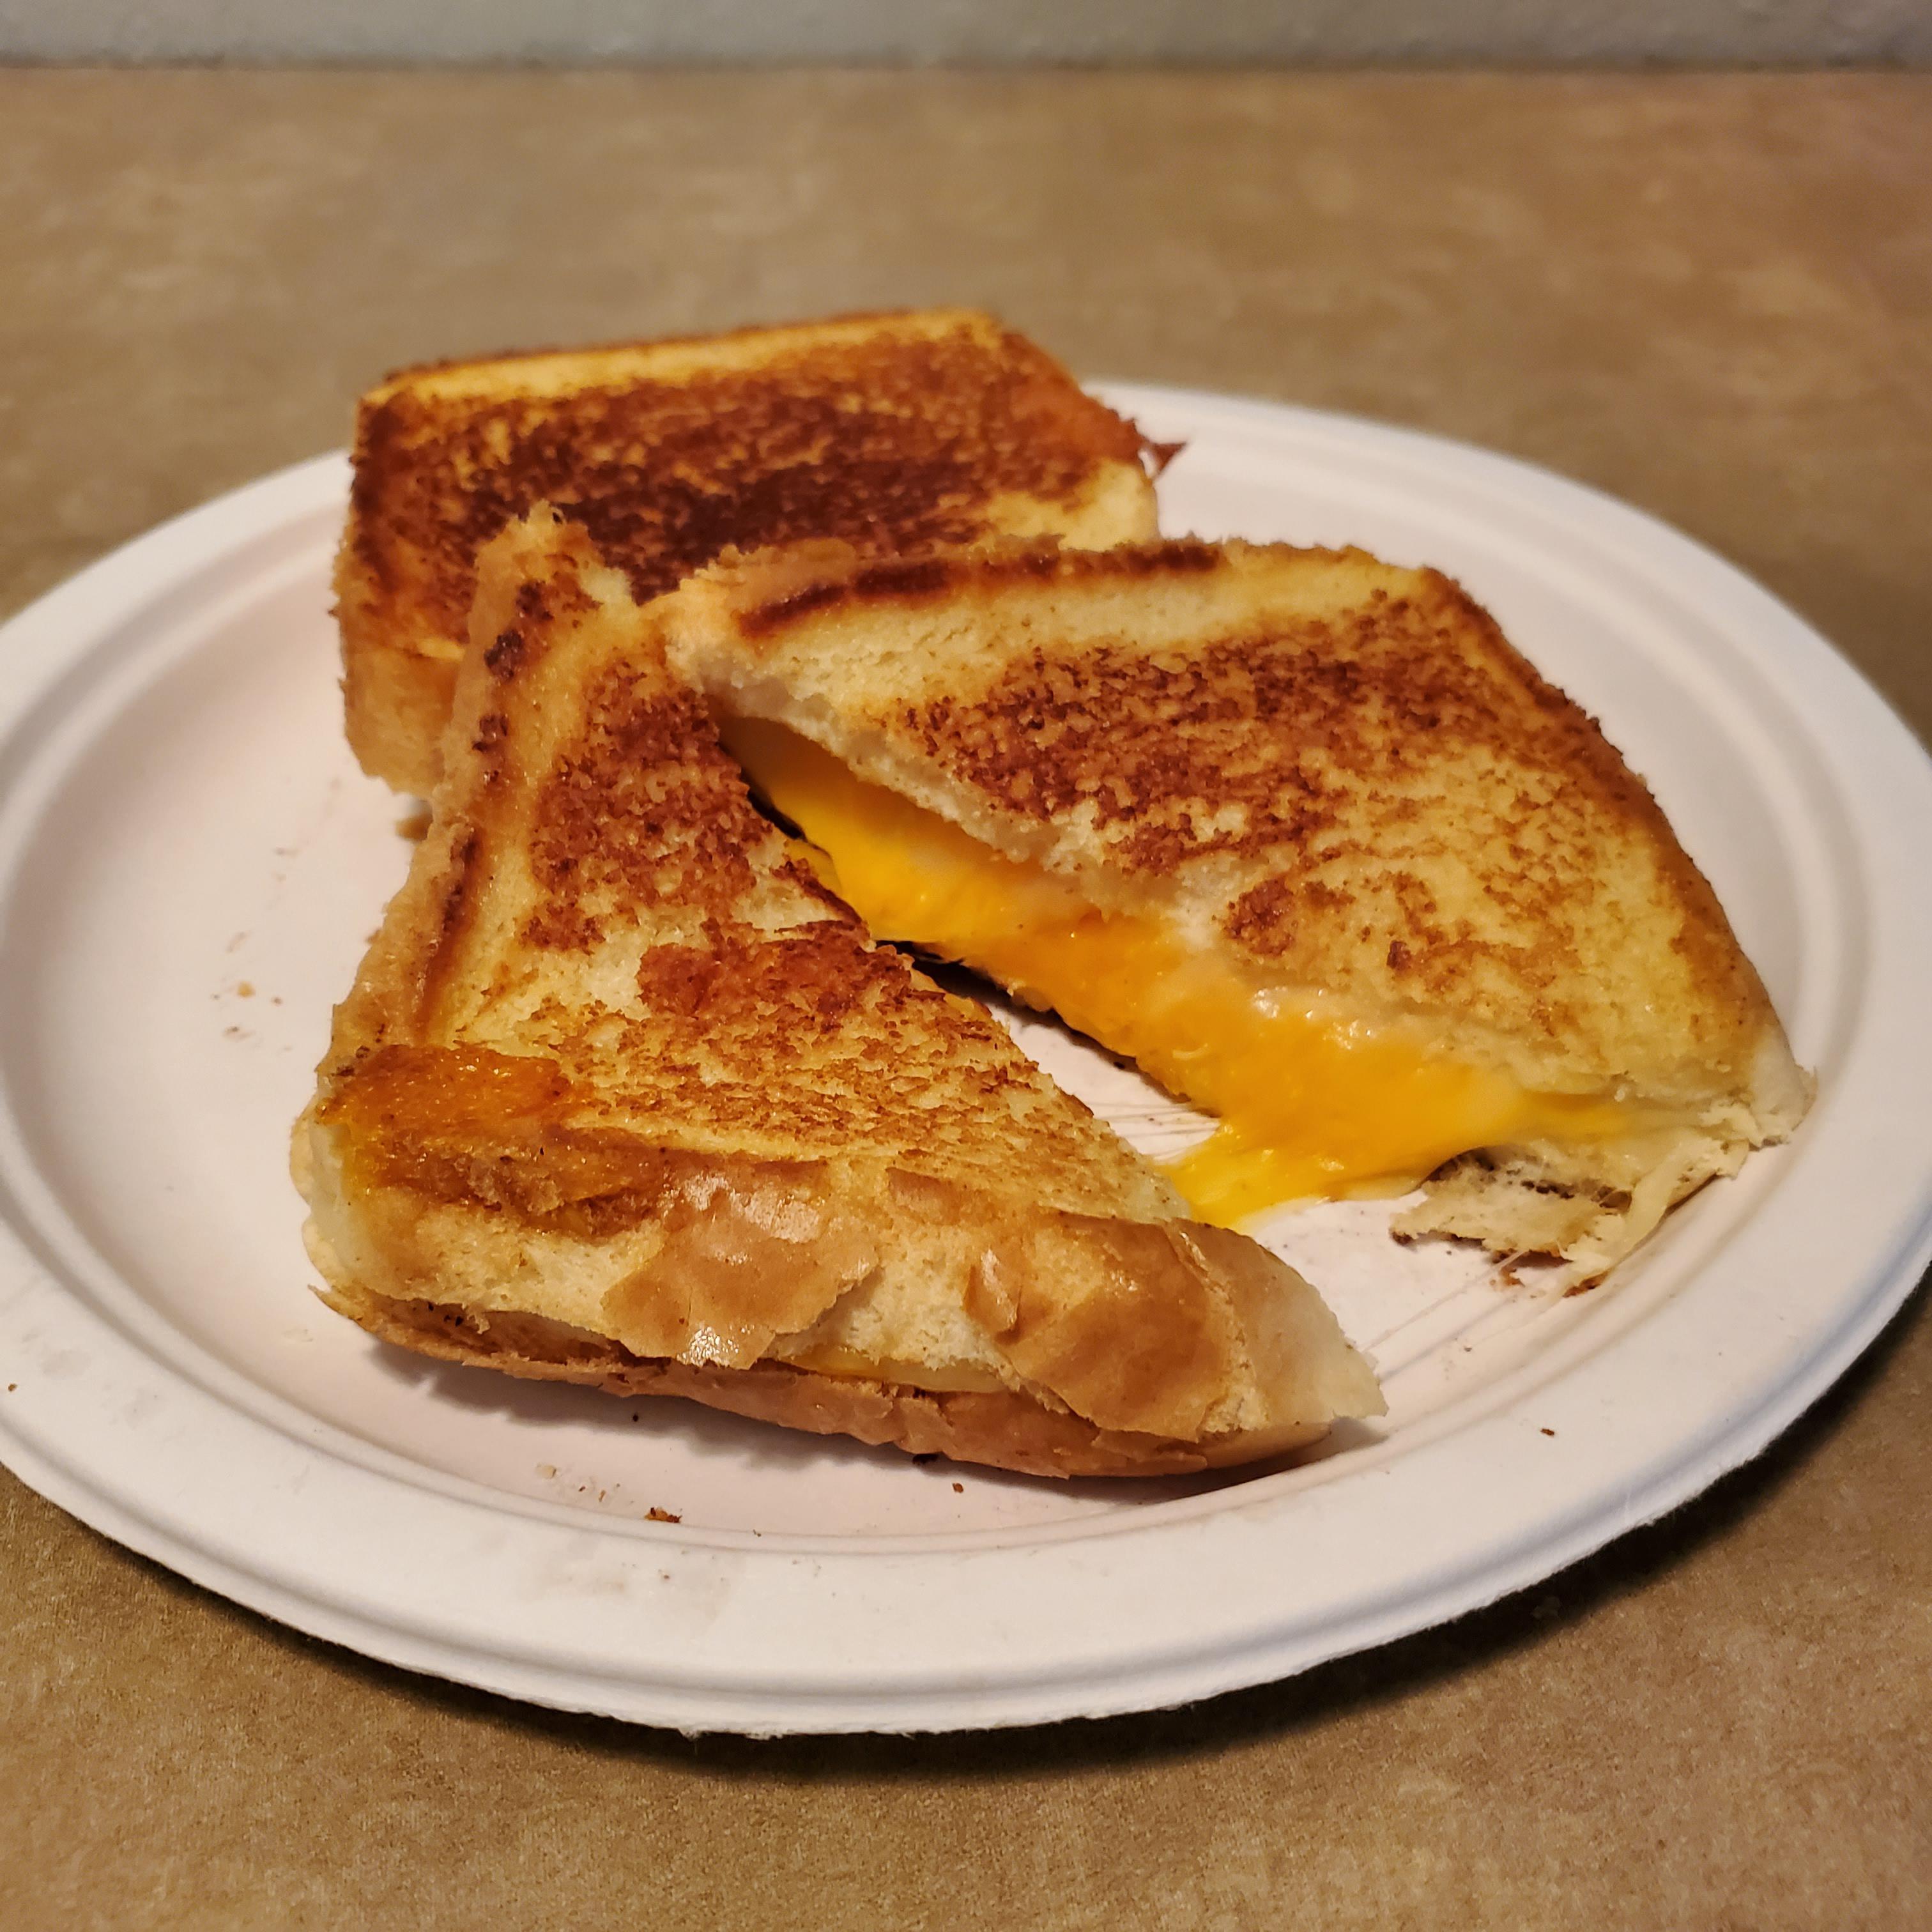 Here's a perfect grilled cheese for your lunchtime enjoyment. - Dining ...